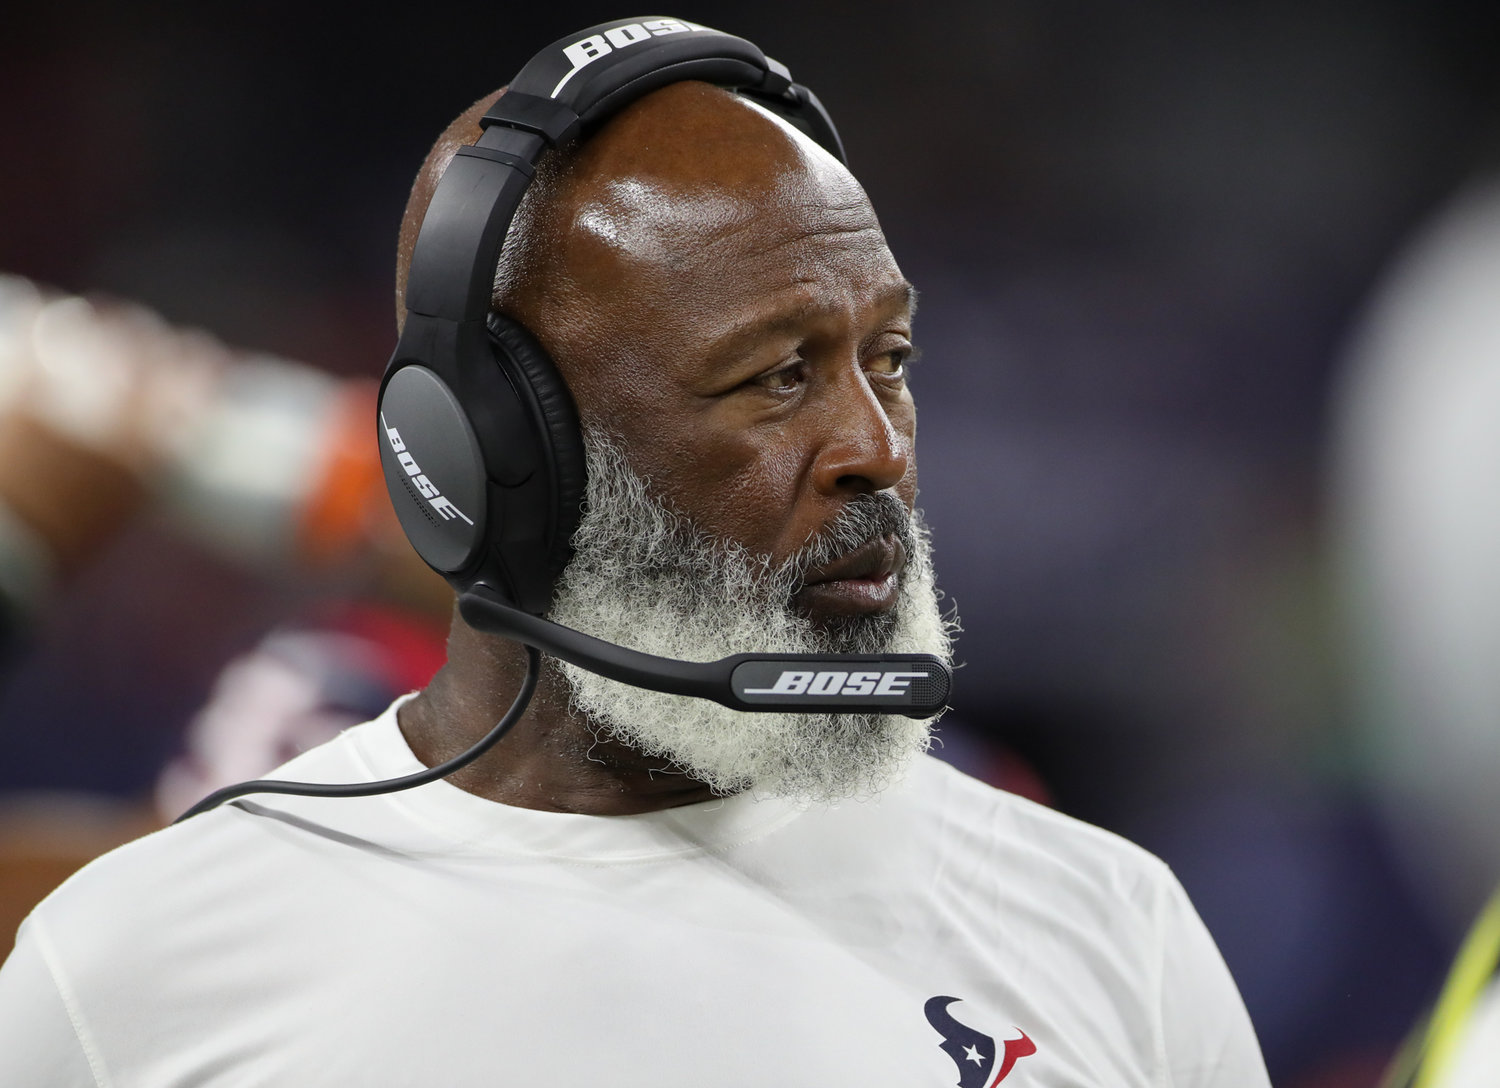 Houston Texans associate head coach and defensive coordinator Lovie Smith during an NFL preseason game between the Houston Texans and the Tampa Bay Buccaneers on August 28, 2021 in Houston, Texas.